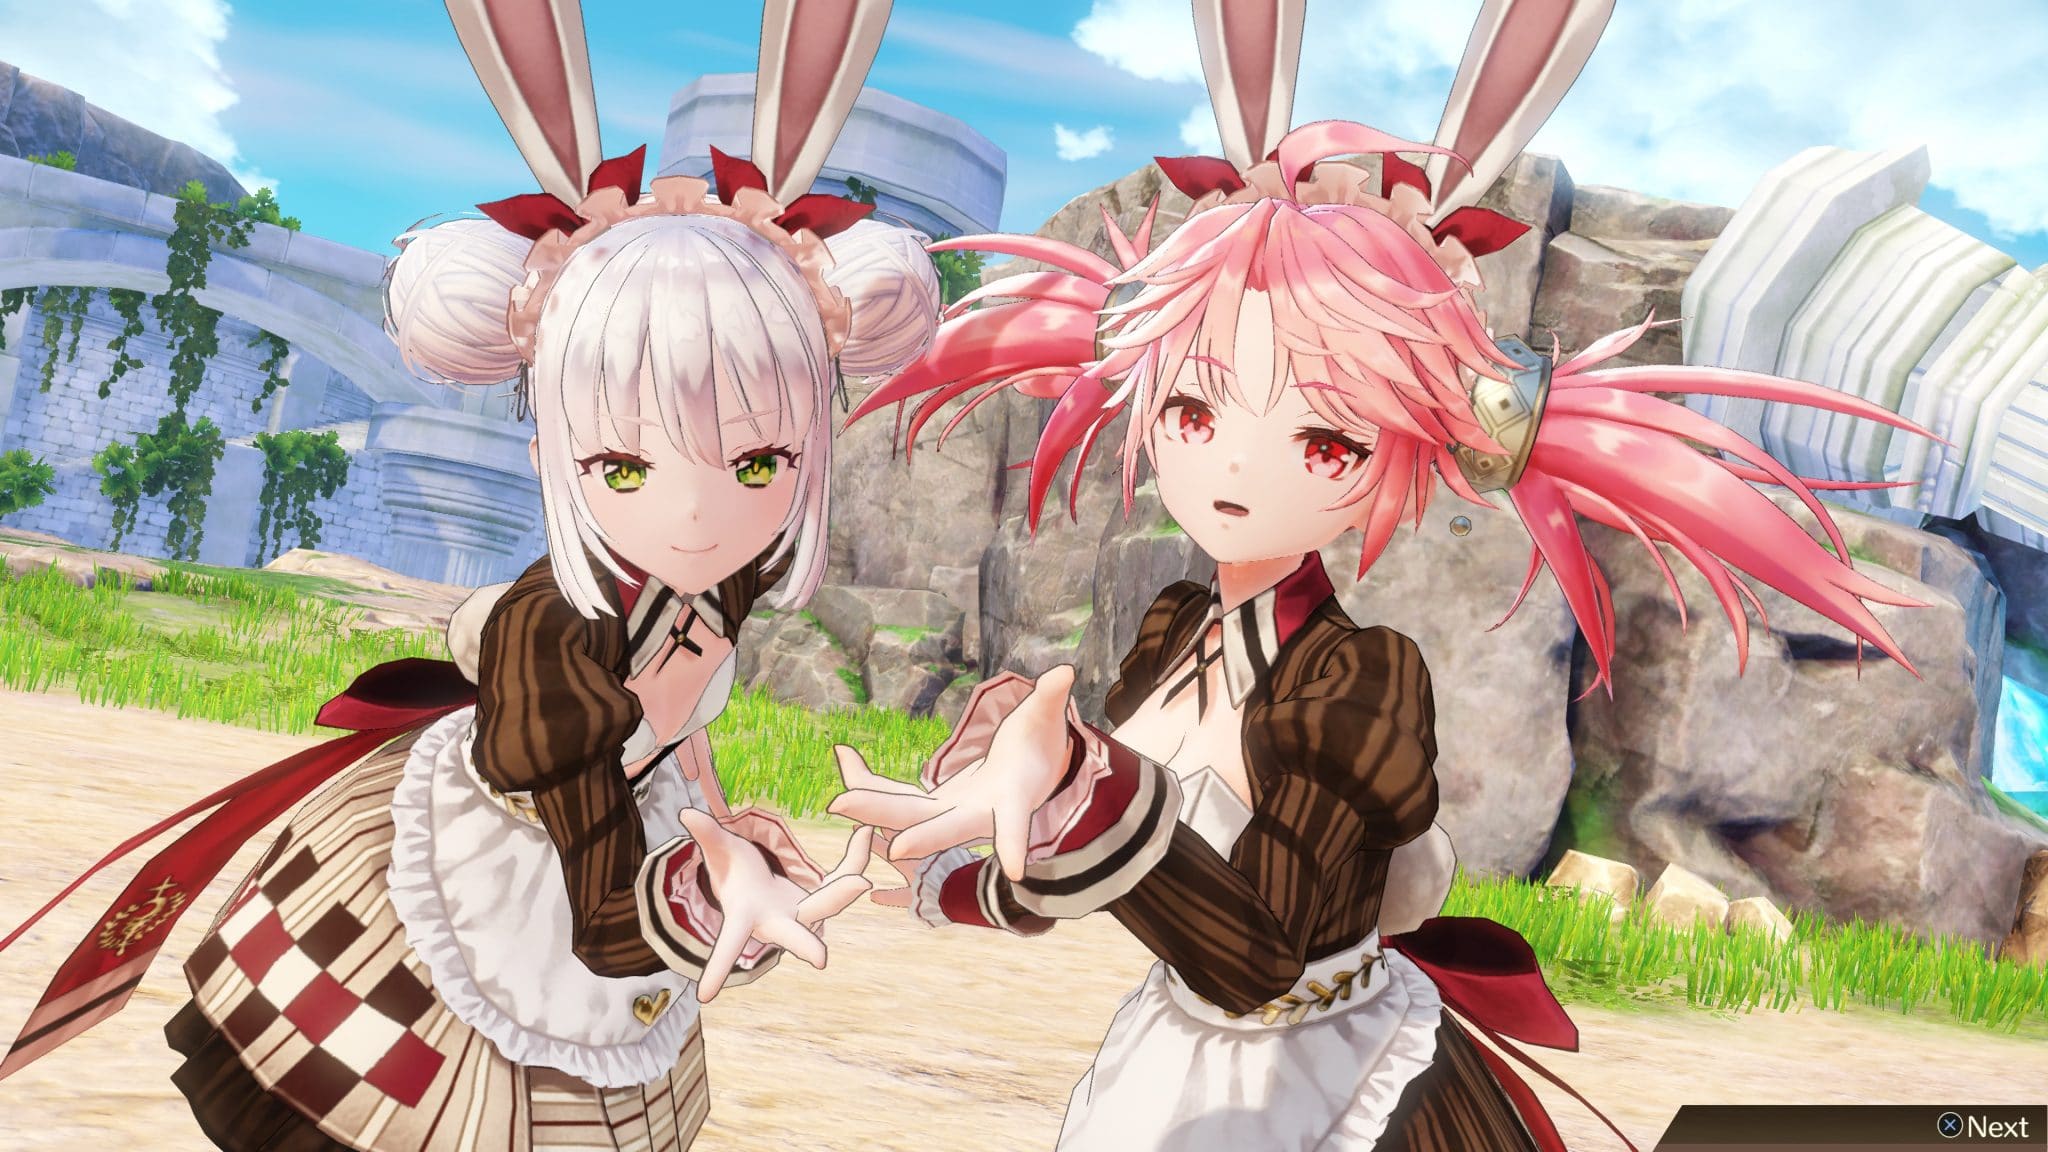 Atelier Sophie 2 Receives New Paid DLC; Bunny Girl Outfits, Recipe Books & Gust Extra BGM